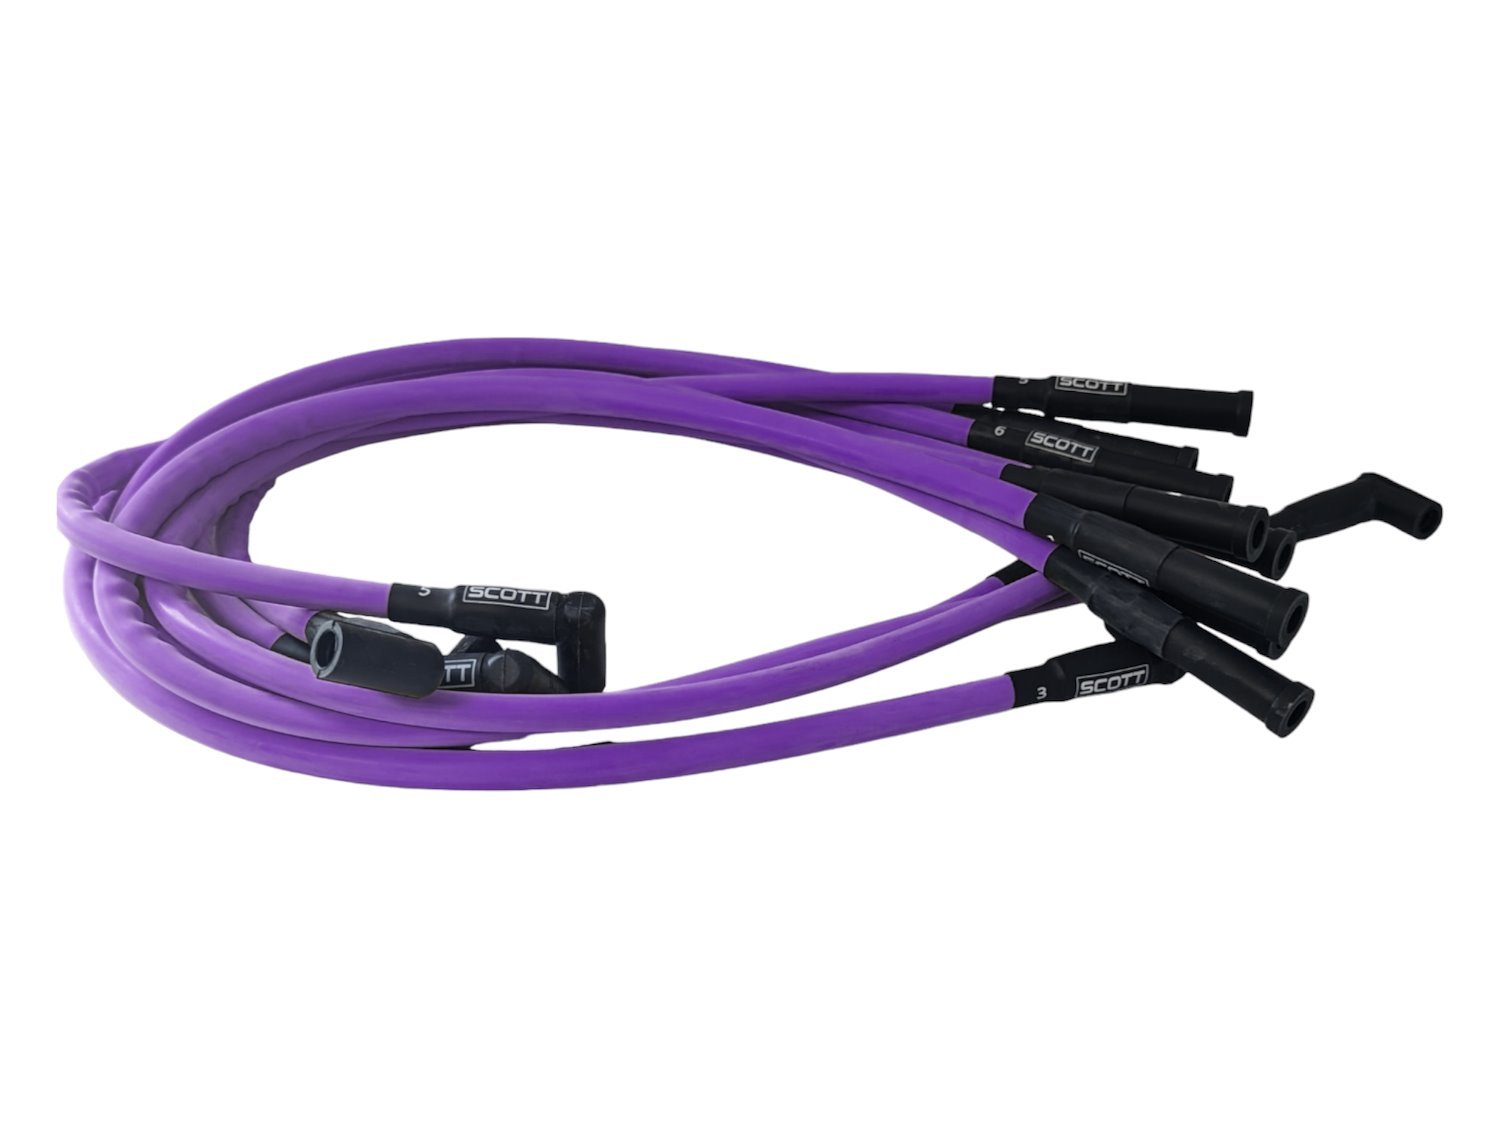 SPW-CH-428-6 High-Performance Silicone-Sleeved Spark Plug Wire Set for Big Block Ford [Purple]